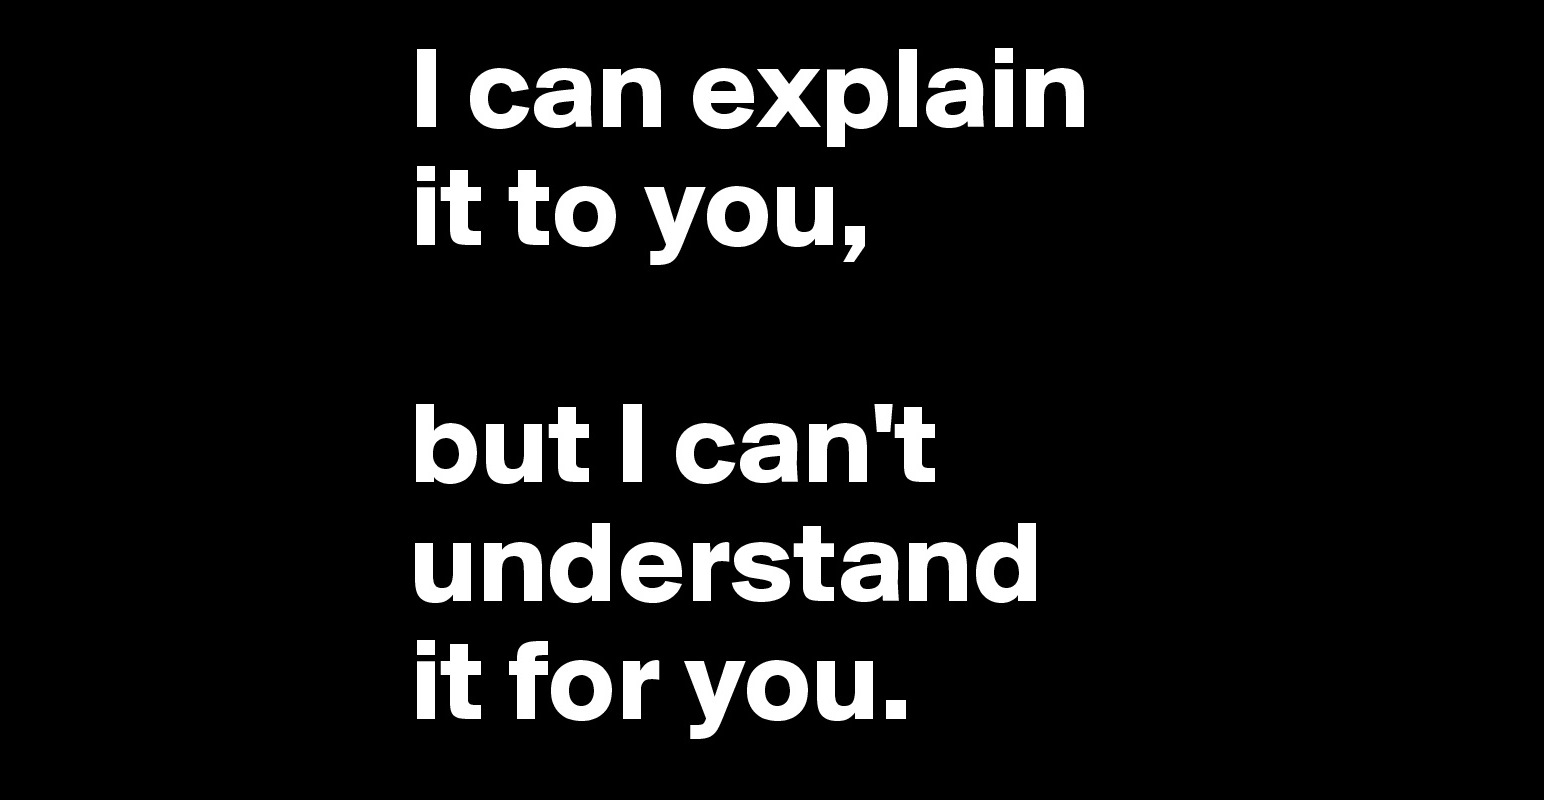 I can explain it to you, but I can't understand it for you. - Post by ...